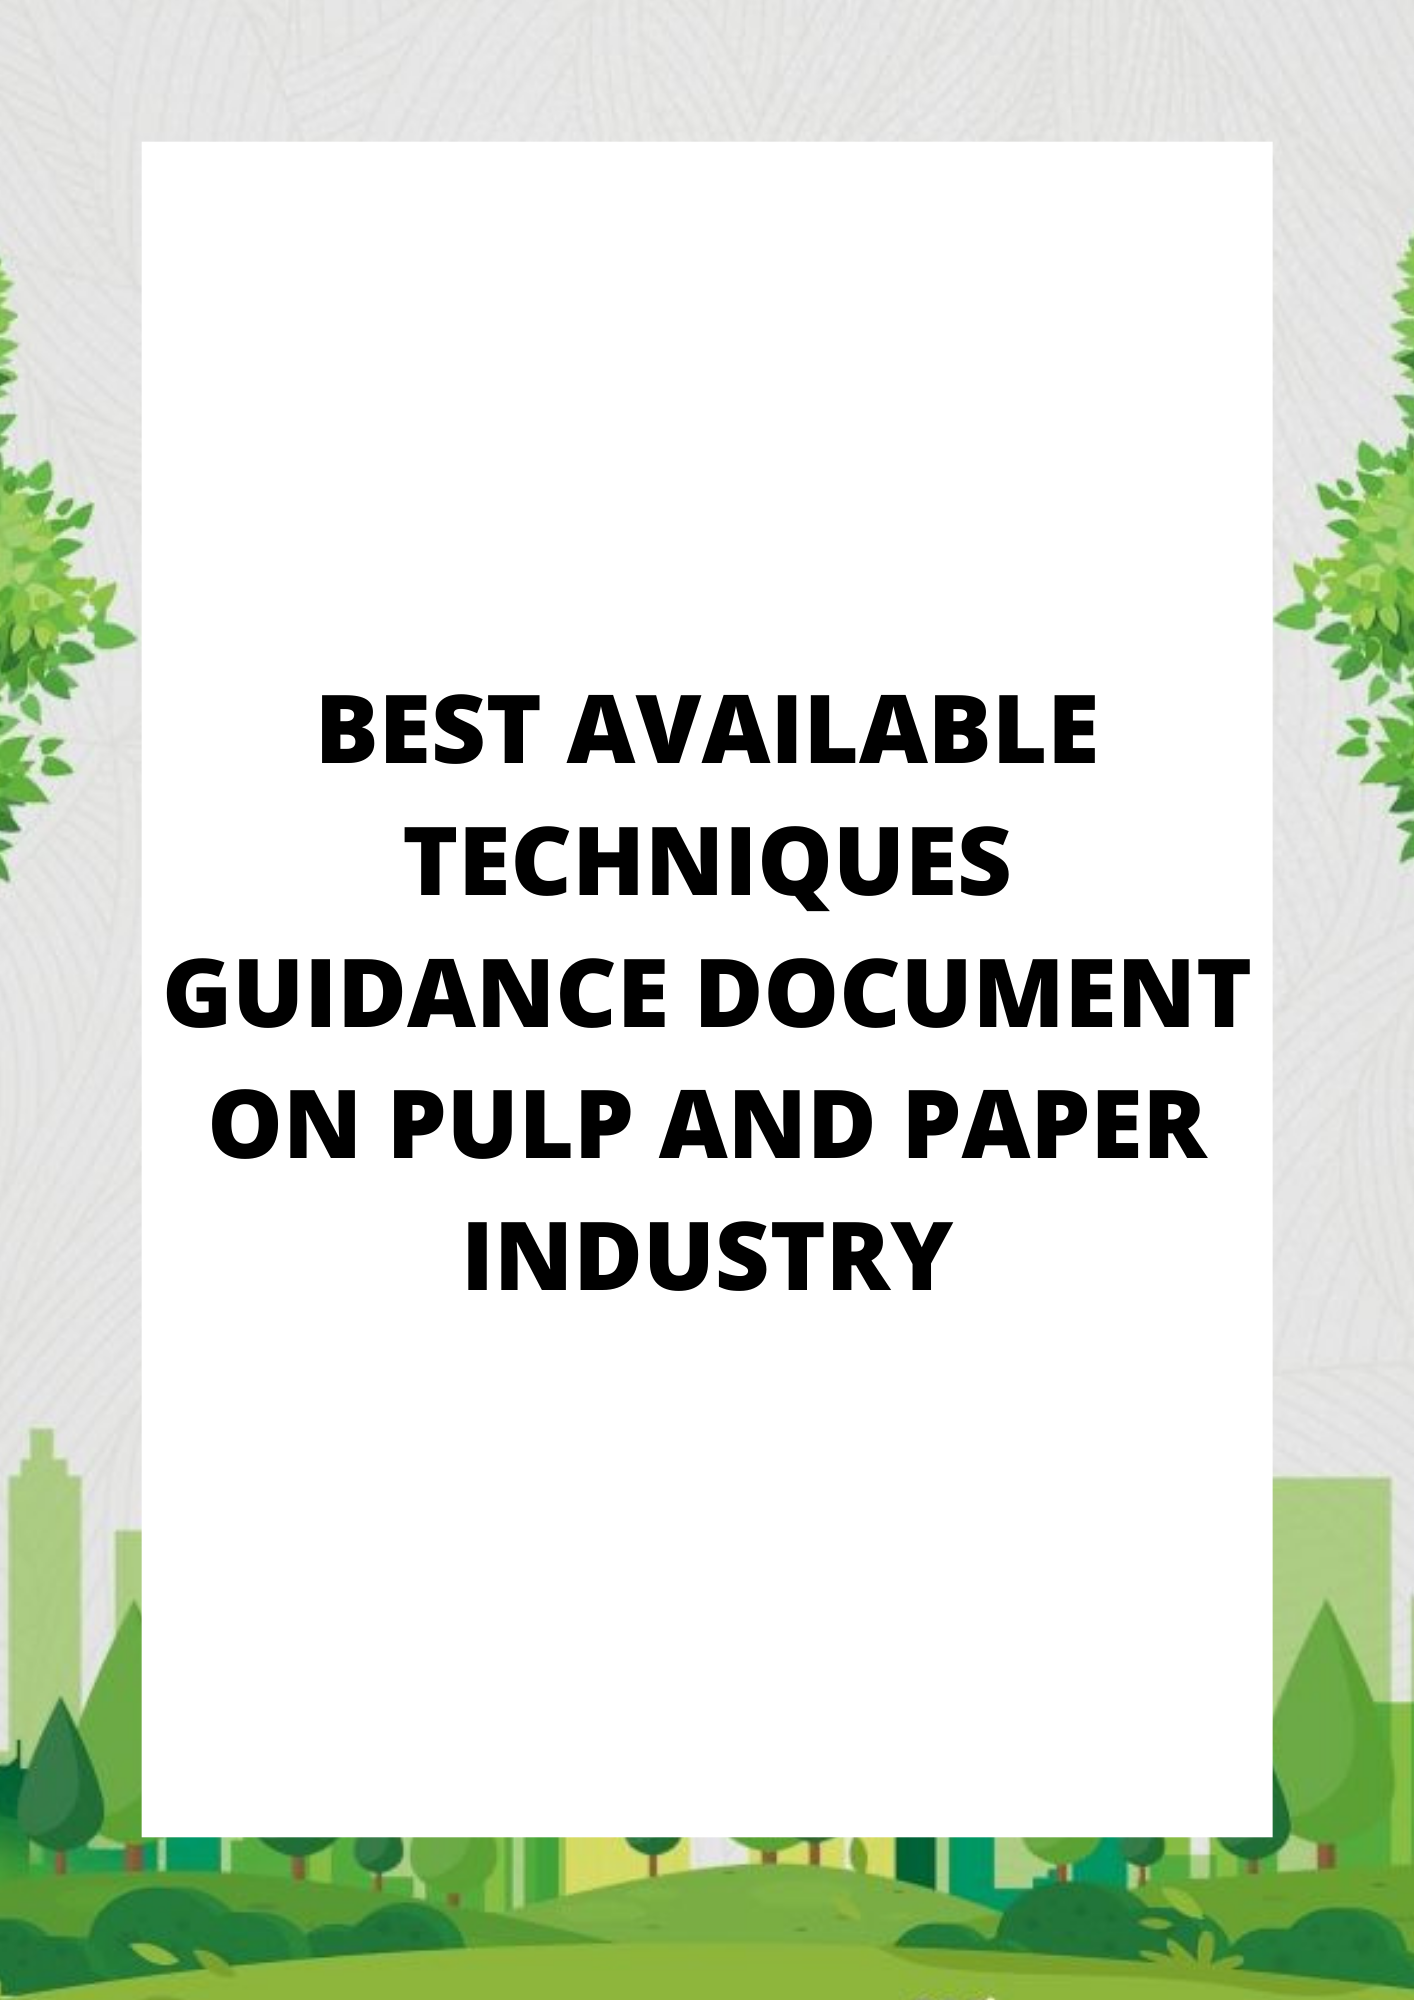 BEST AVAILABLE TECHNIQUES GUIDANCE DOCUMENT ON PULP AND PAPER INDUSTRY